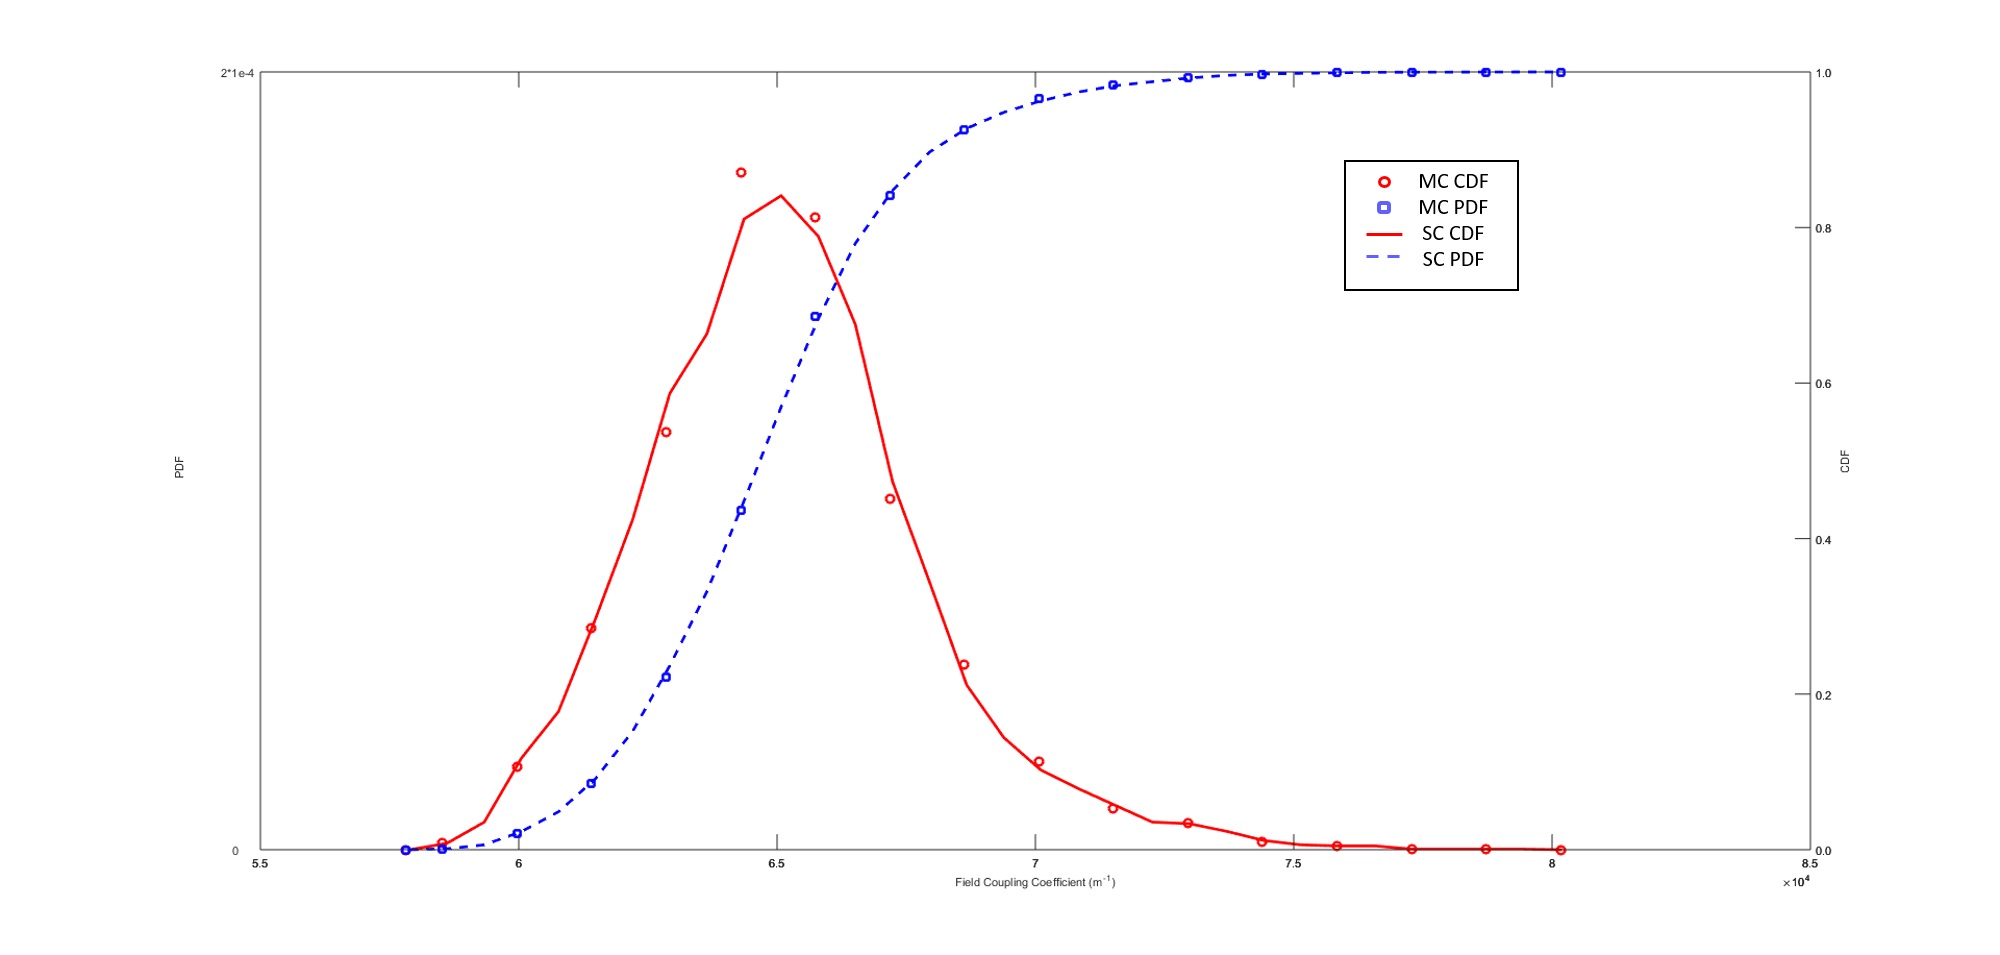 PDF and CDF of the coupling coefficient for wavelength at 1.55 μm obtained by means of the SC model and MC model, respectively.